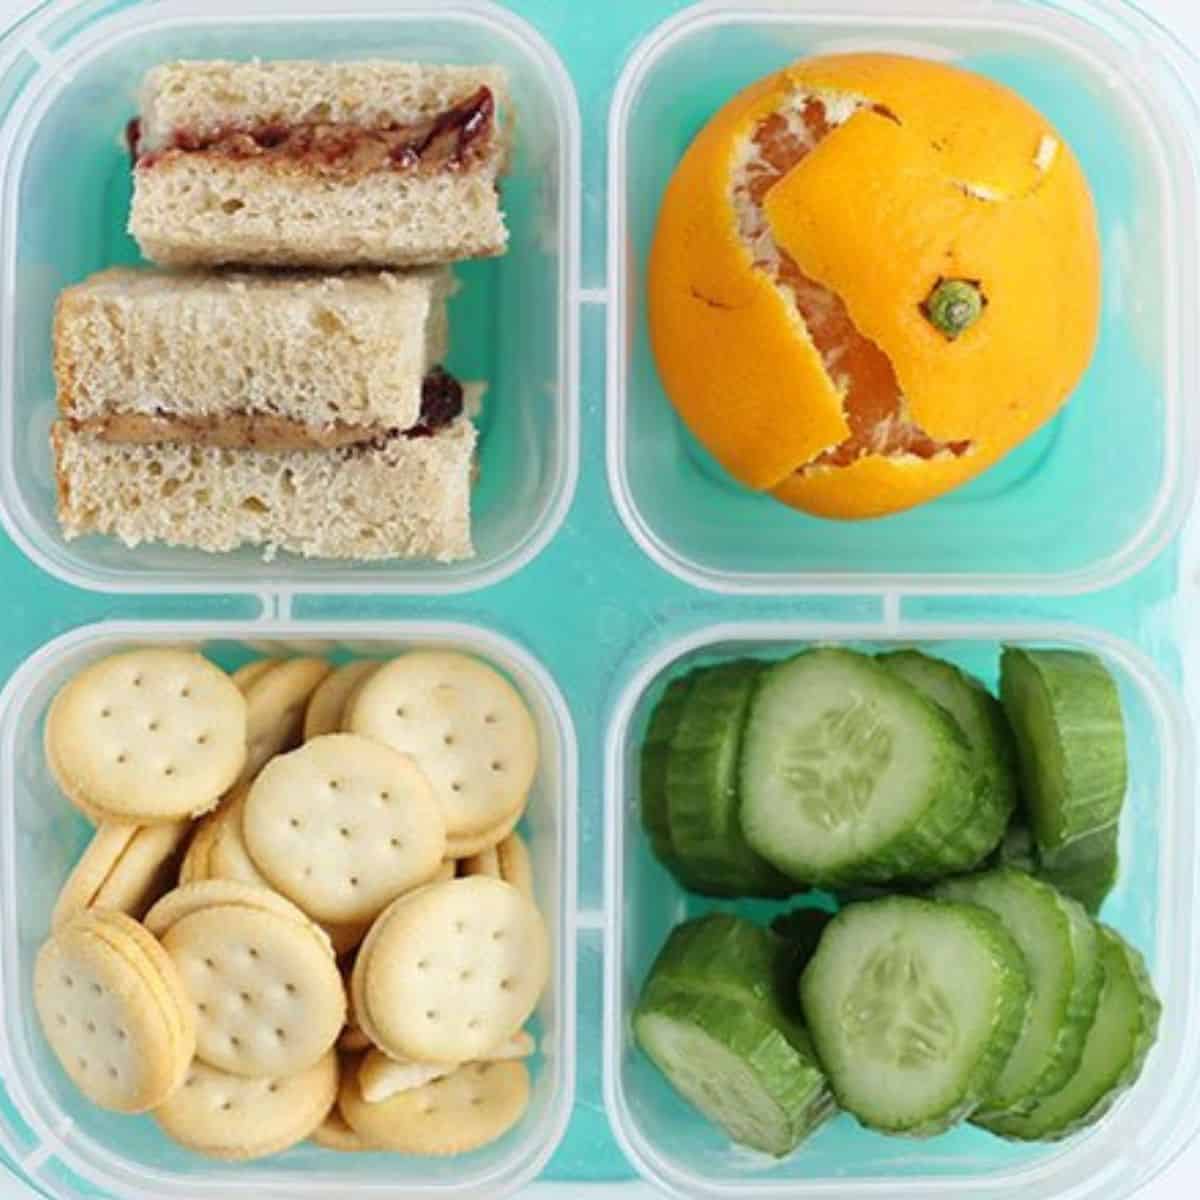 https://www.ohhappyjoy.com/wp-content/uploads/2023/02/Lunch-ideas-for-toddlers-in-preschool-daycare.jpg